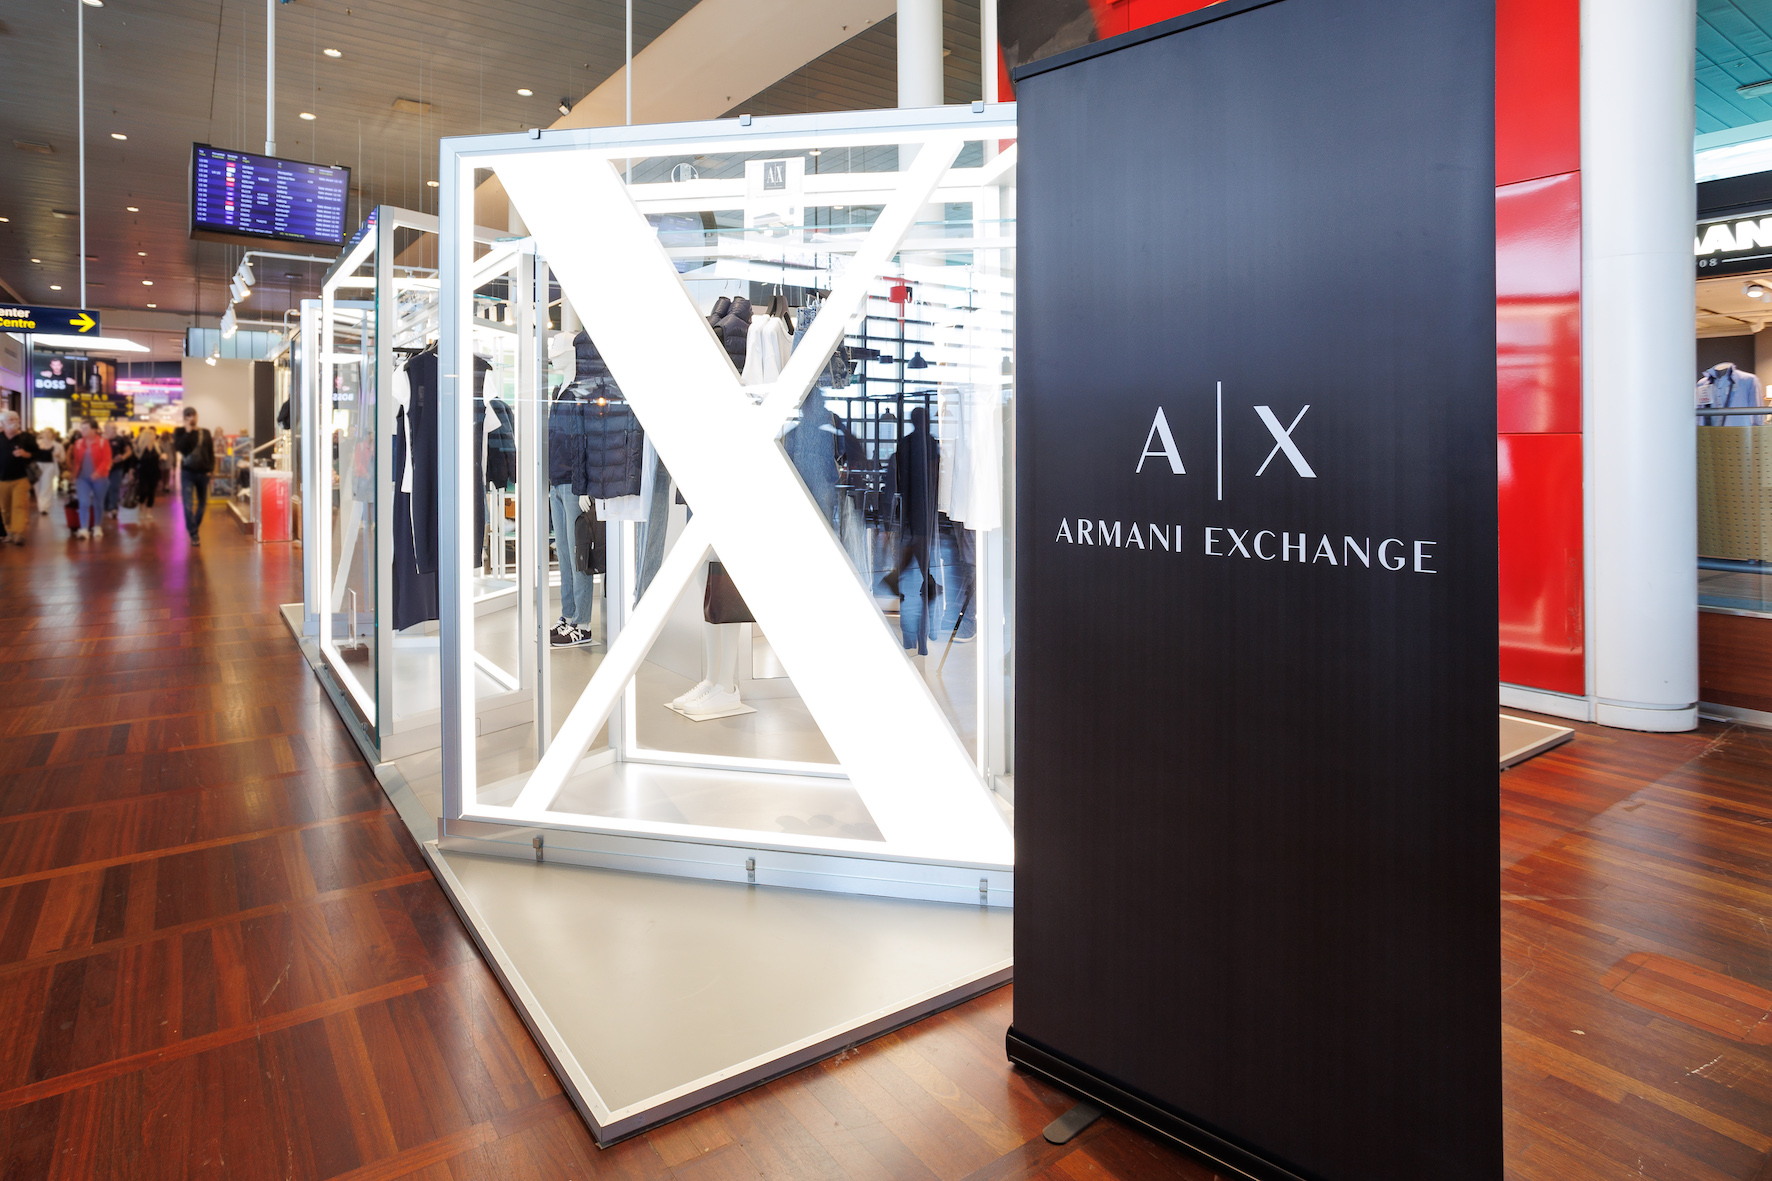 Gebr. Heinemann in travel retail first with opening of A|X Armani Exchange  pop-up : The Moodie Davitt Report -The Moodie Davitt Report